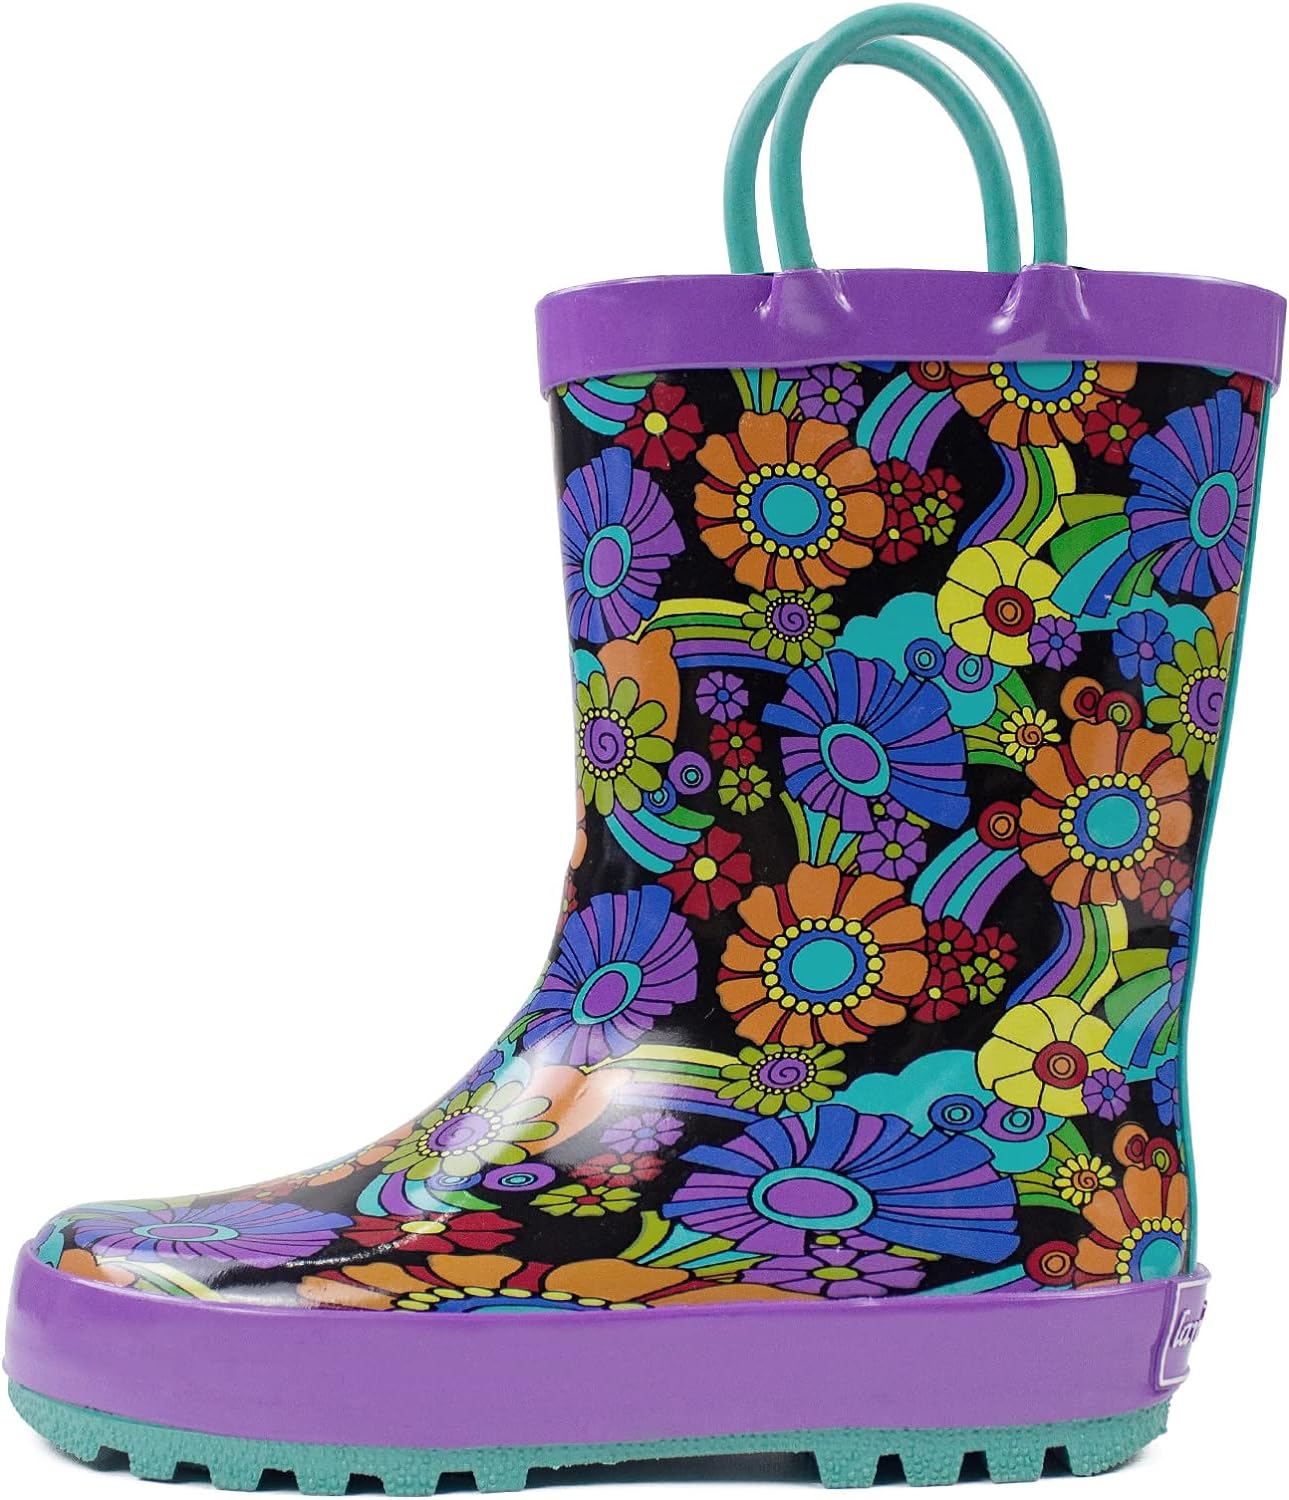 Kids Rain Boots Waterproof Rubber Boots for Girls and Boys with Fun Patterns and Easy-On Handles Landchief Toddler Rain Boots 